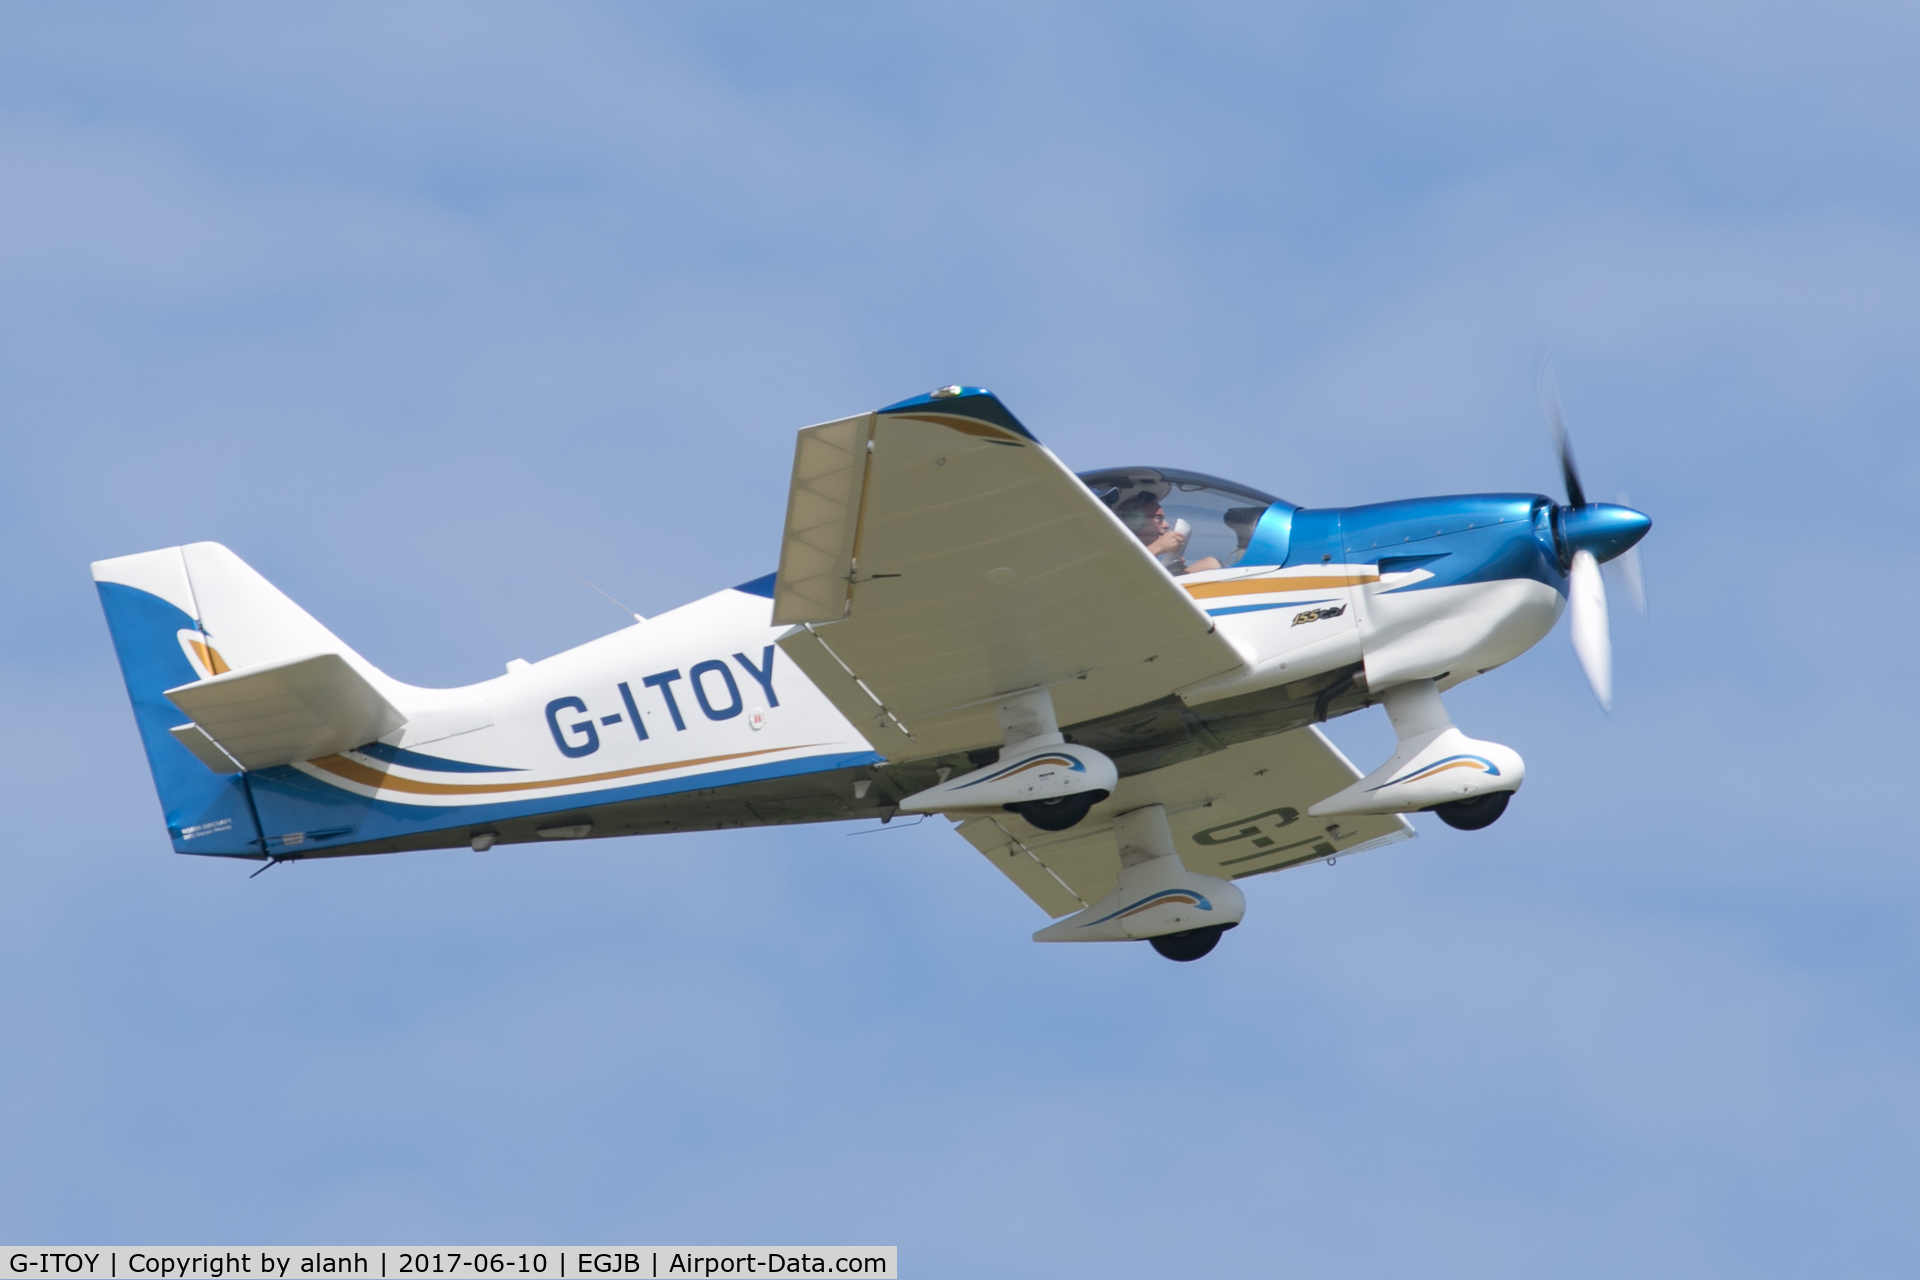 G-ITOY, 2015 Robin DR-400-140B Major Major C/N 2682, Departing Guernsey for the 2017 Aero Club Rally Navex